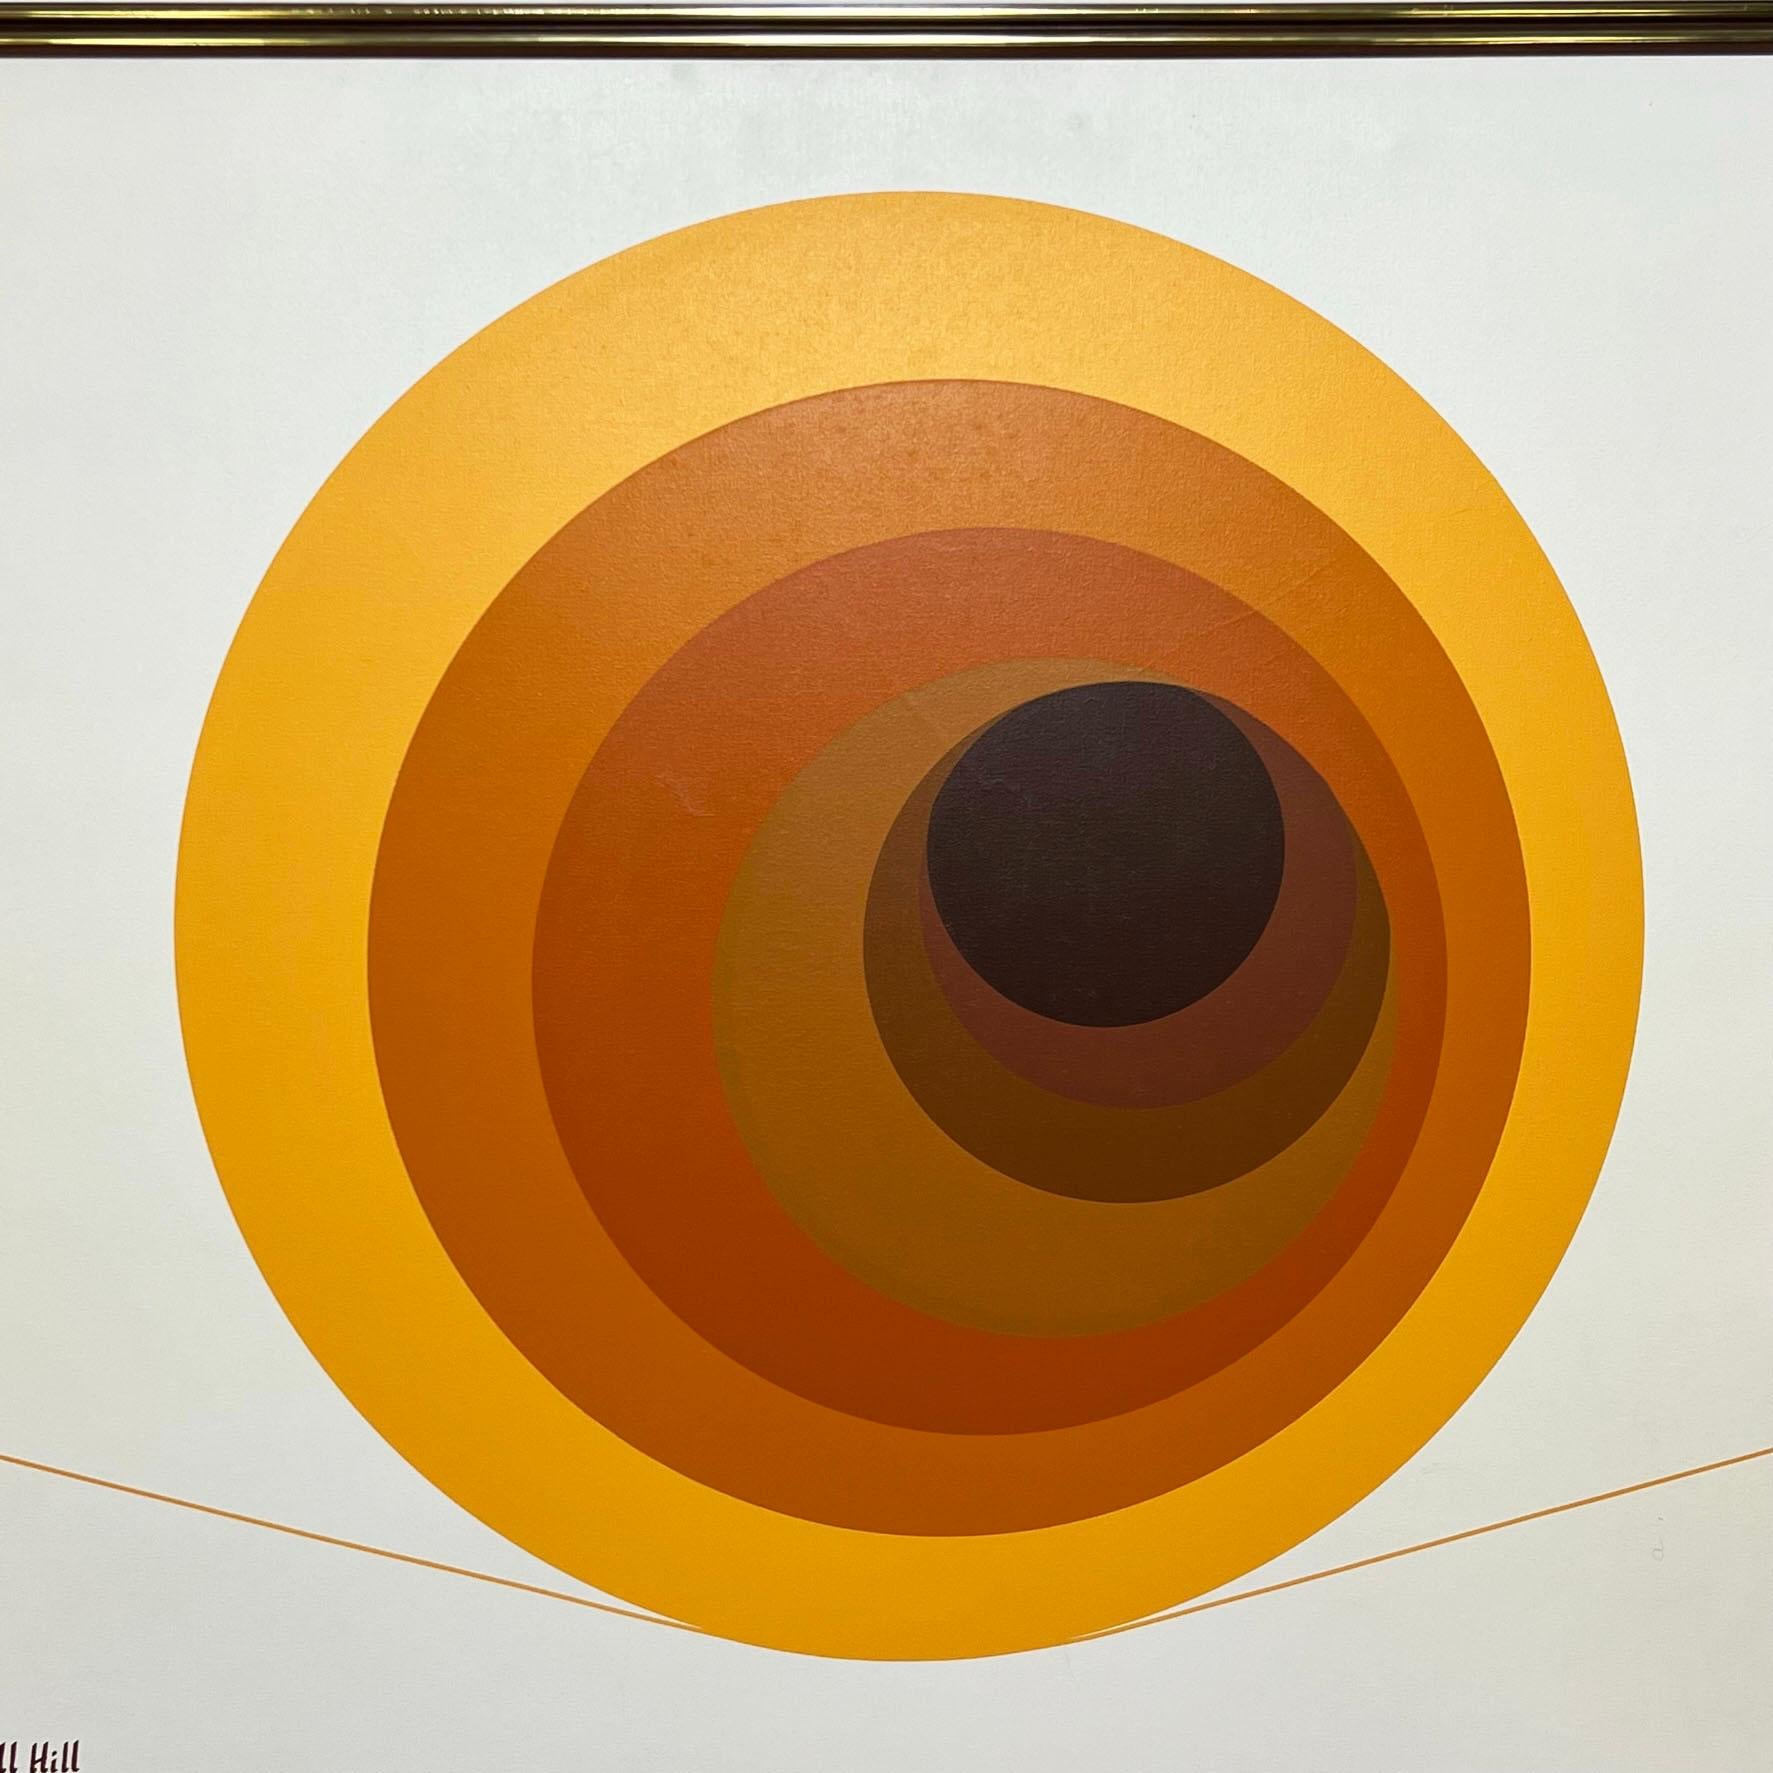 Large scale original op art painting signed Lowell Hill, circa 1970s.